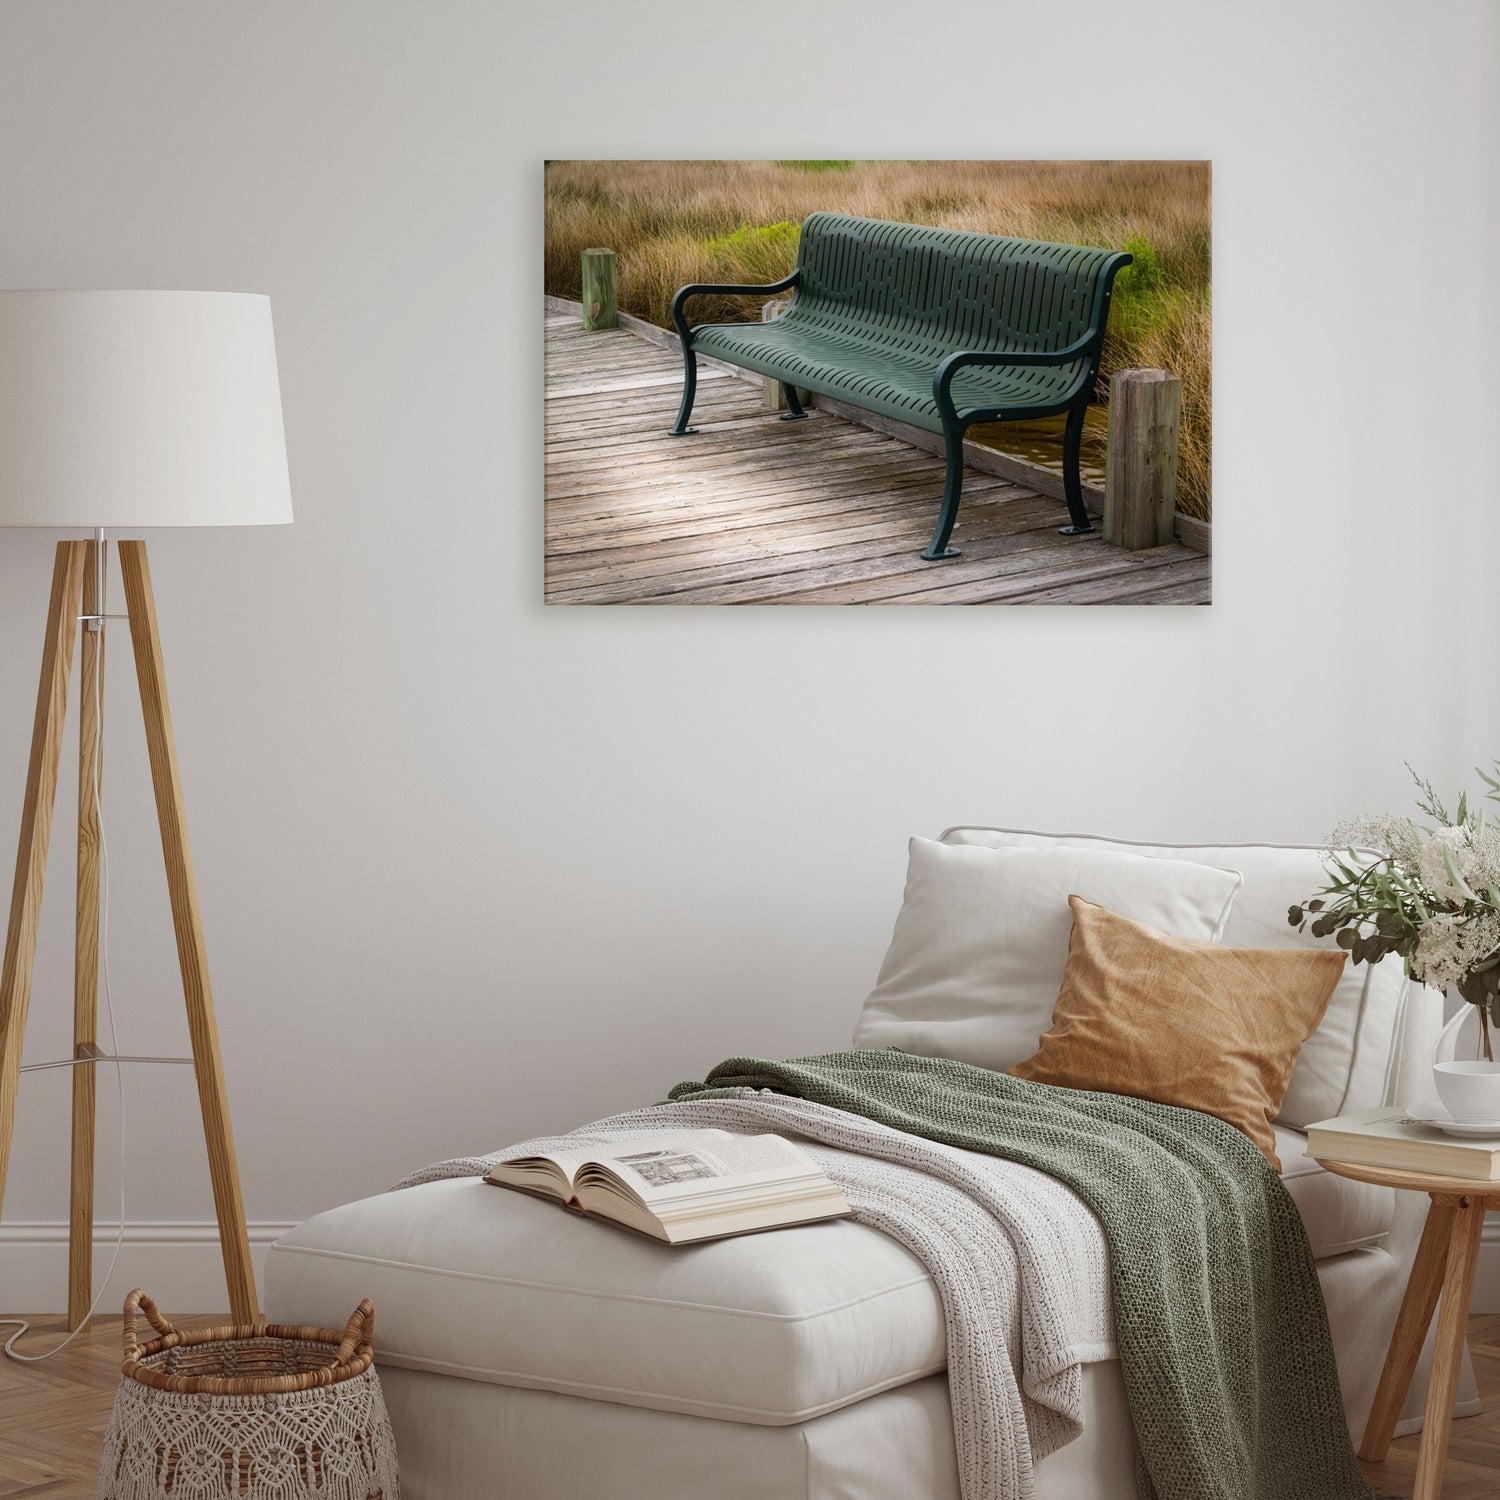 This canvas art provides a snapshot of a peaceful moment by the sea, featuring a seaside bench with tall seagrasses in the background.